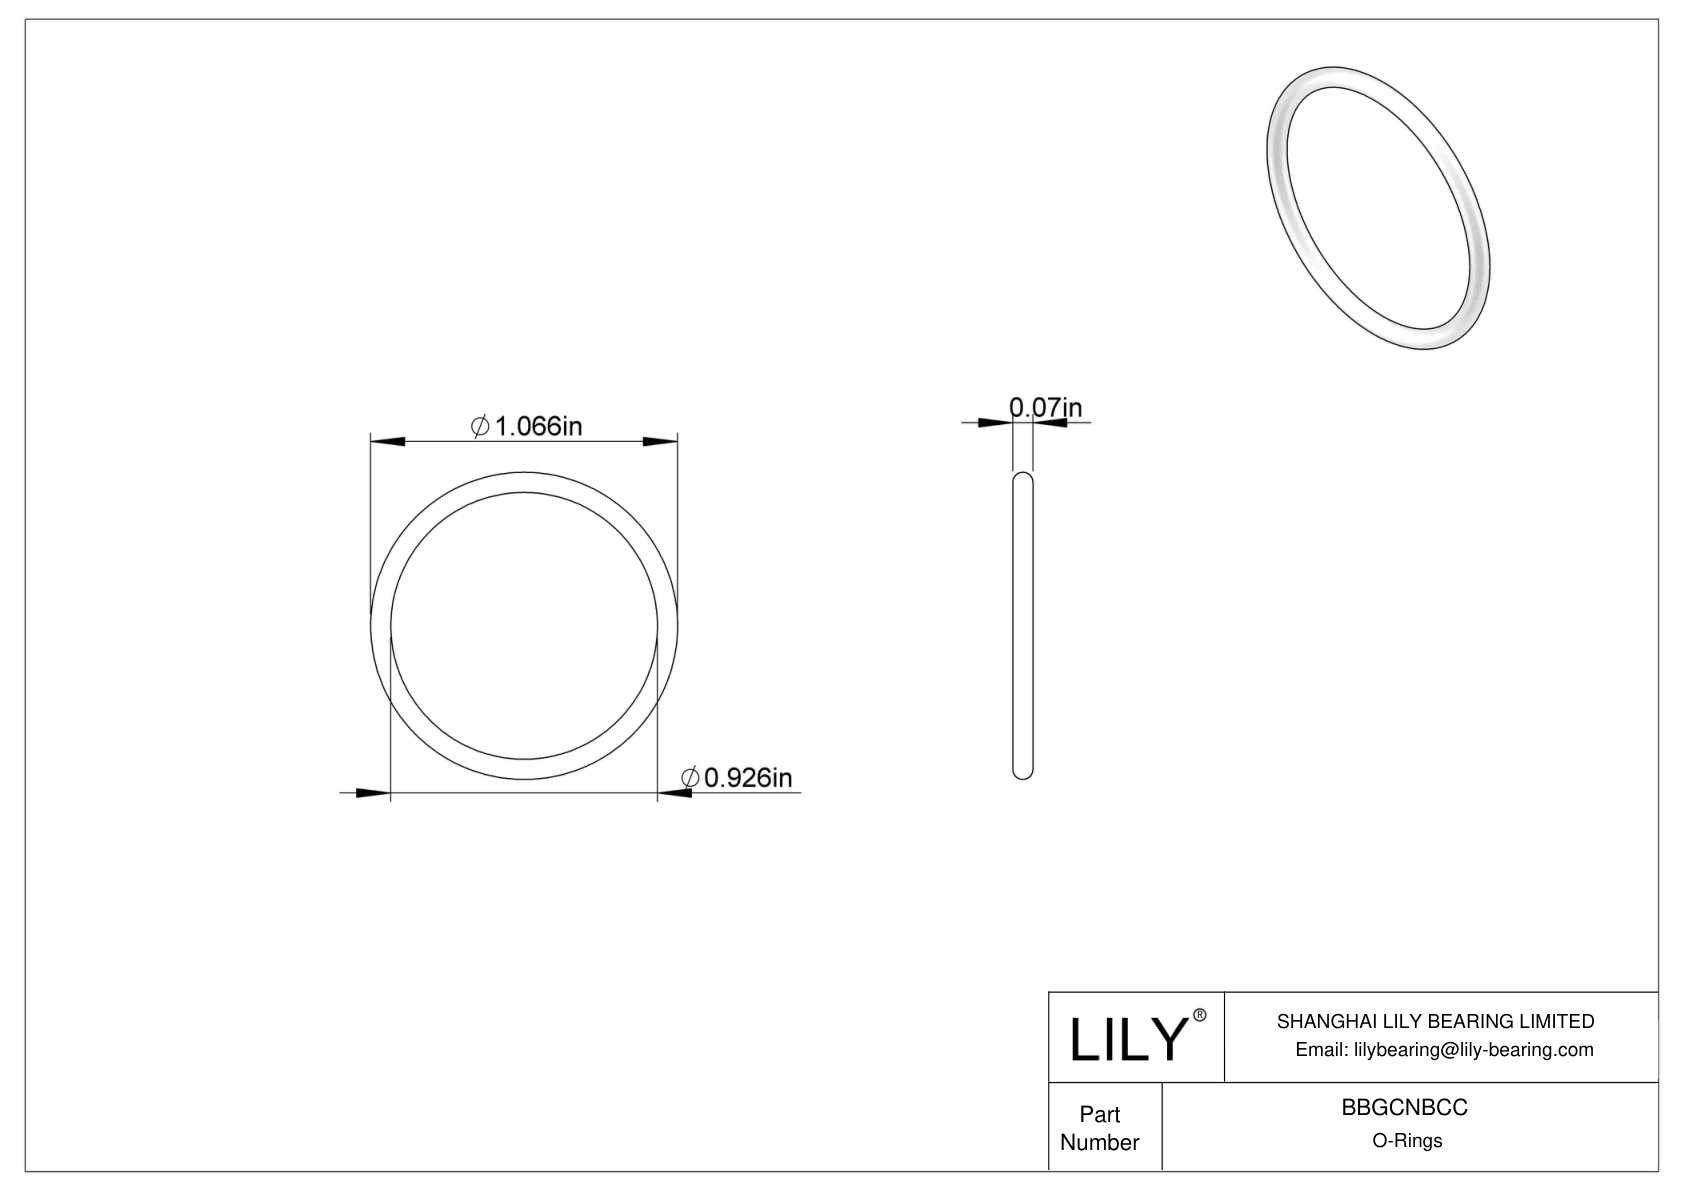 BBGCNBCC High Temperature O-Rings Round cad drawing